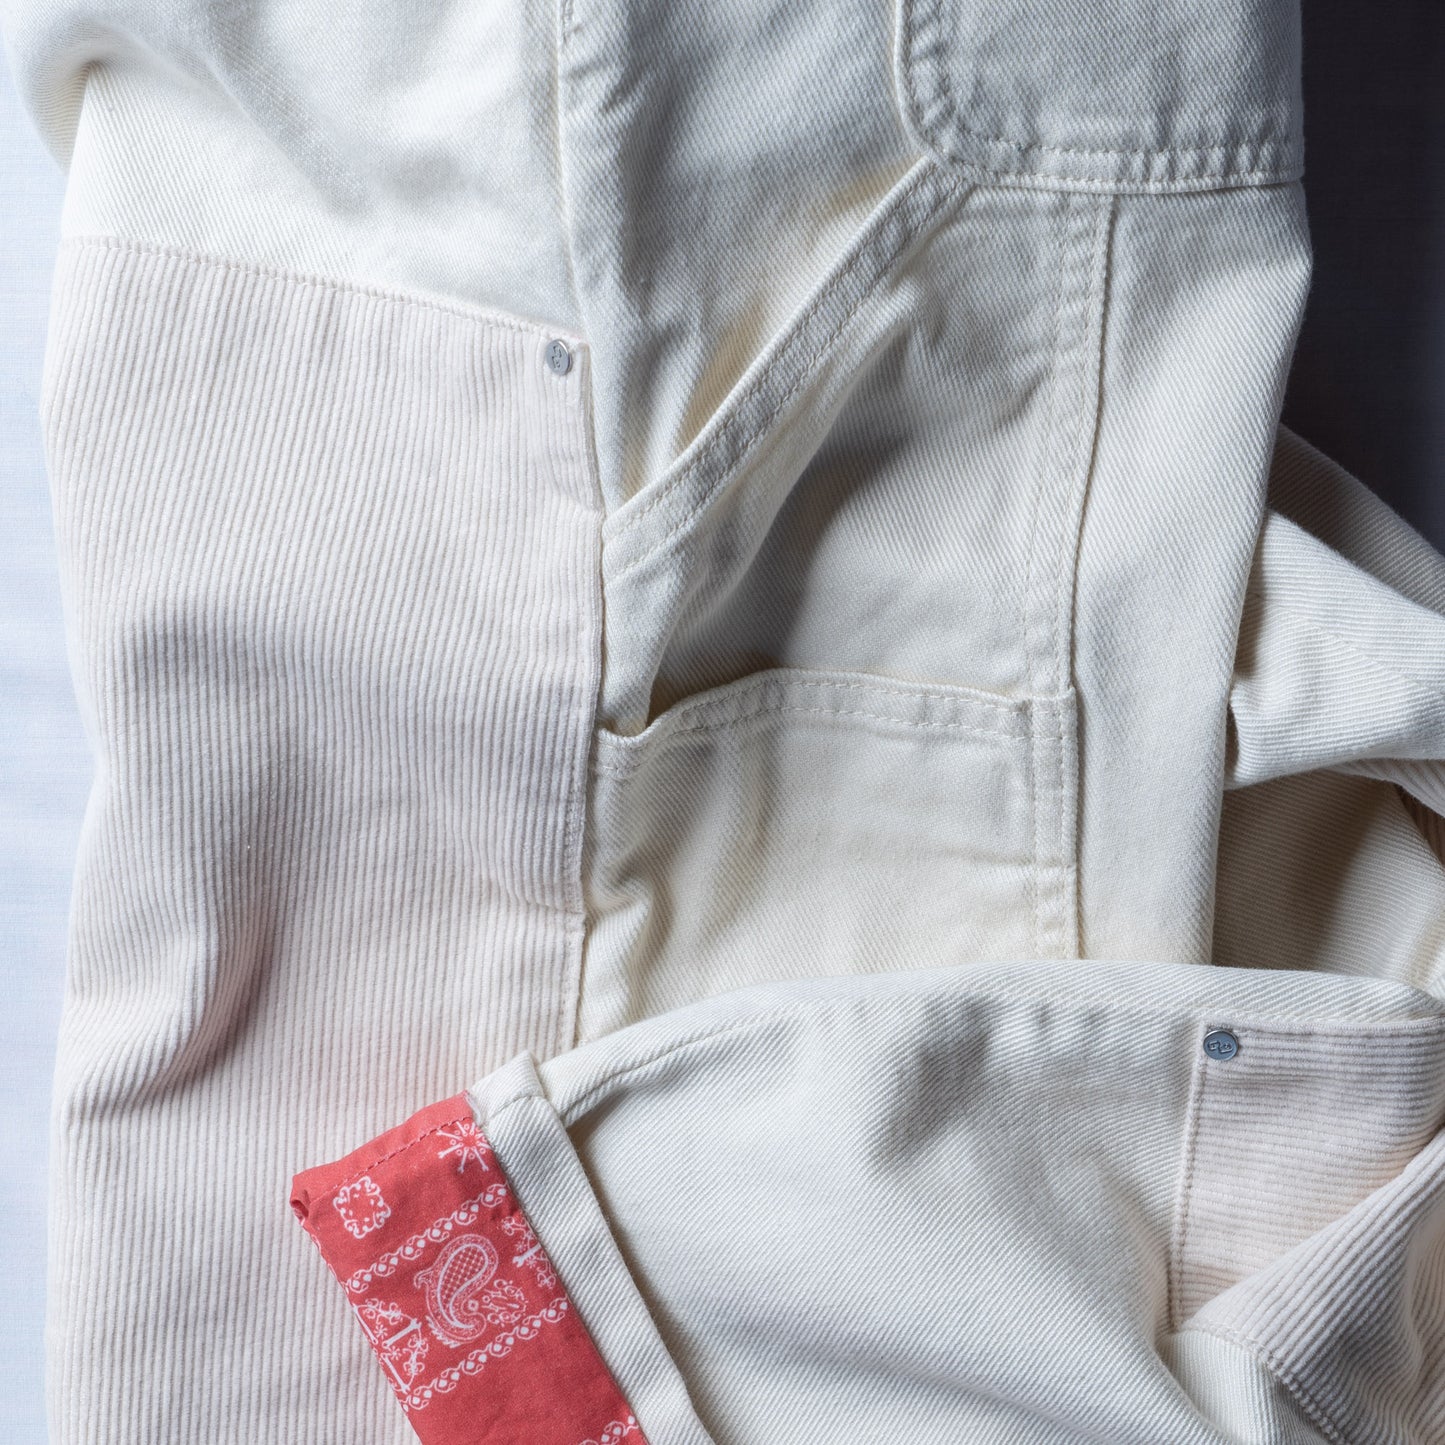 DRIVER'S DOUBLE KNEE PANT - OFF WHITE